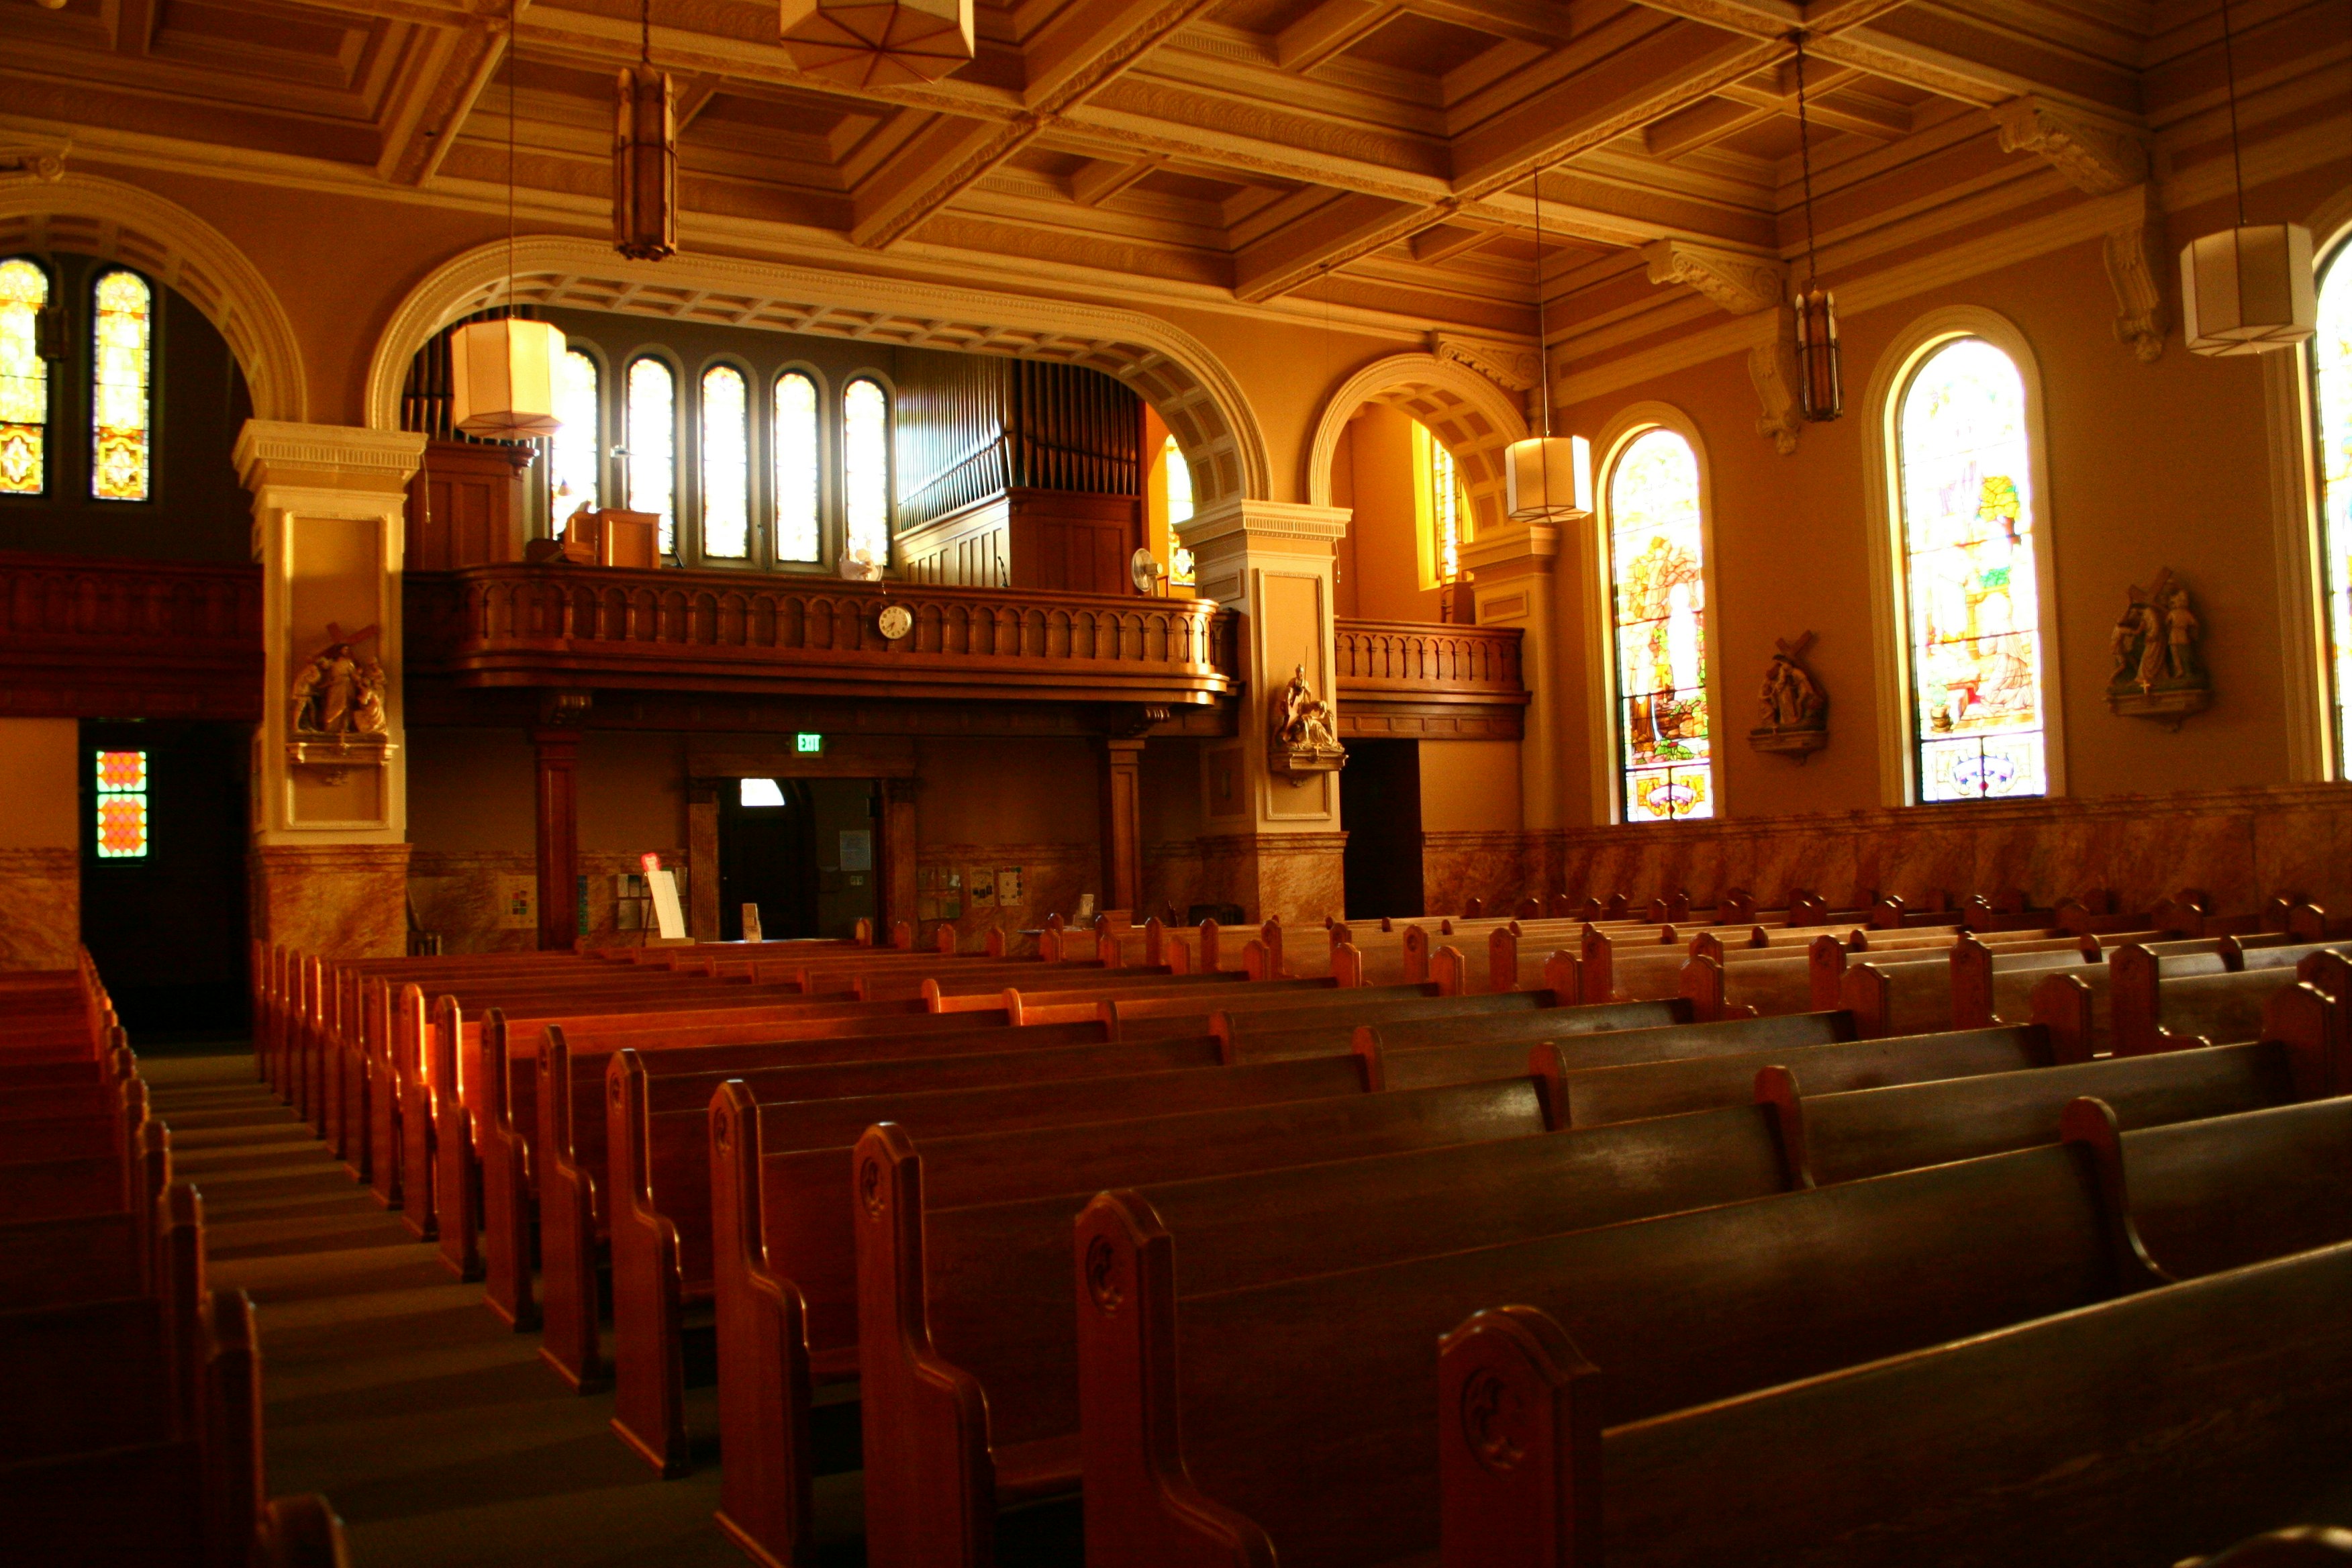 brown wooden chairs inside church